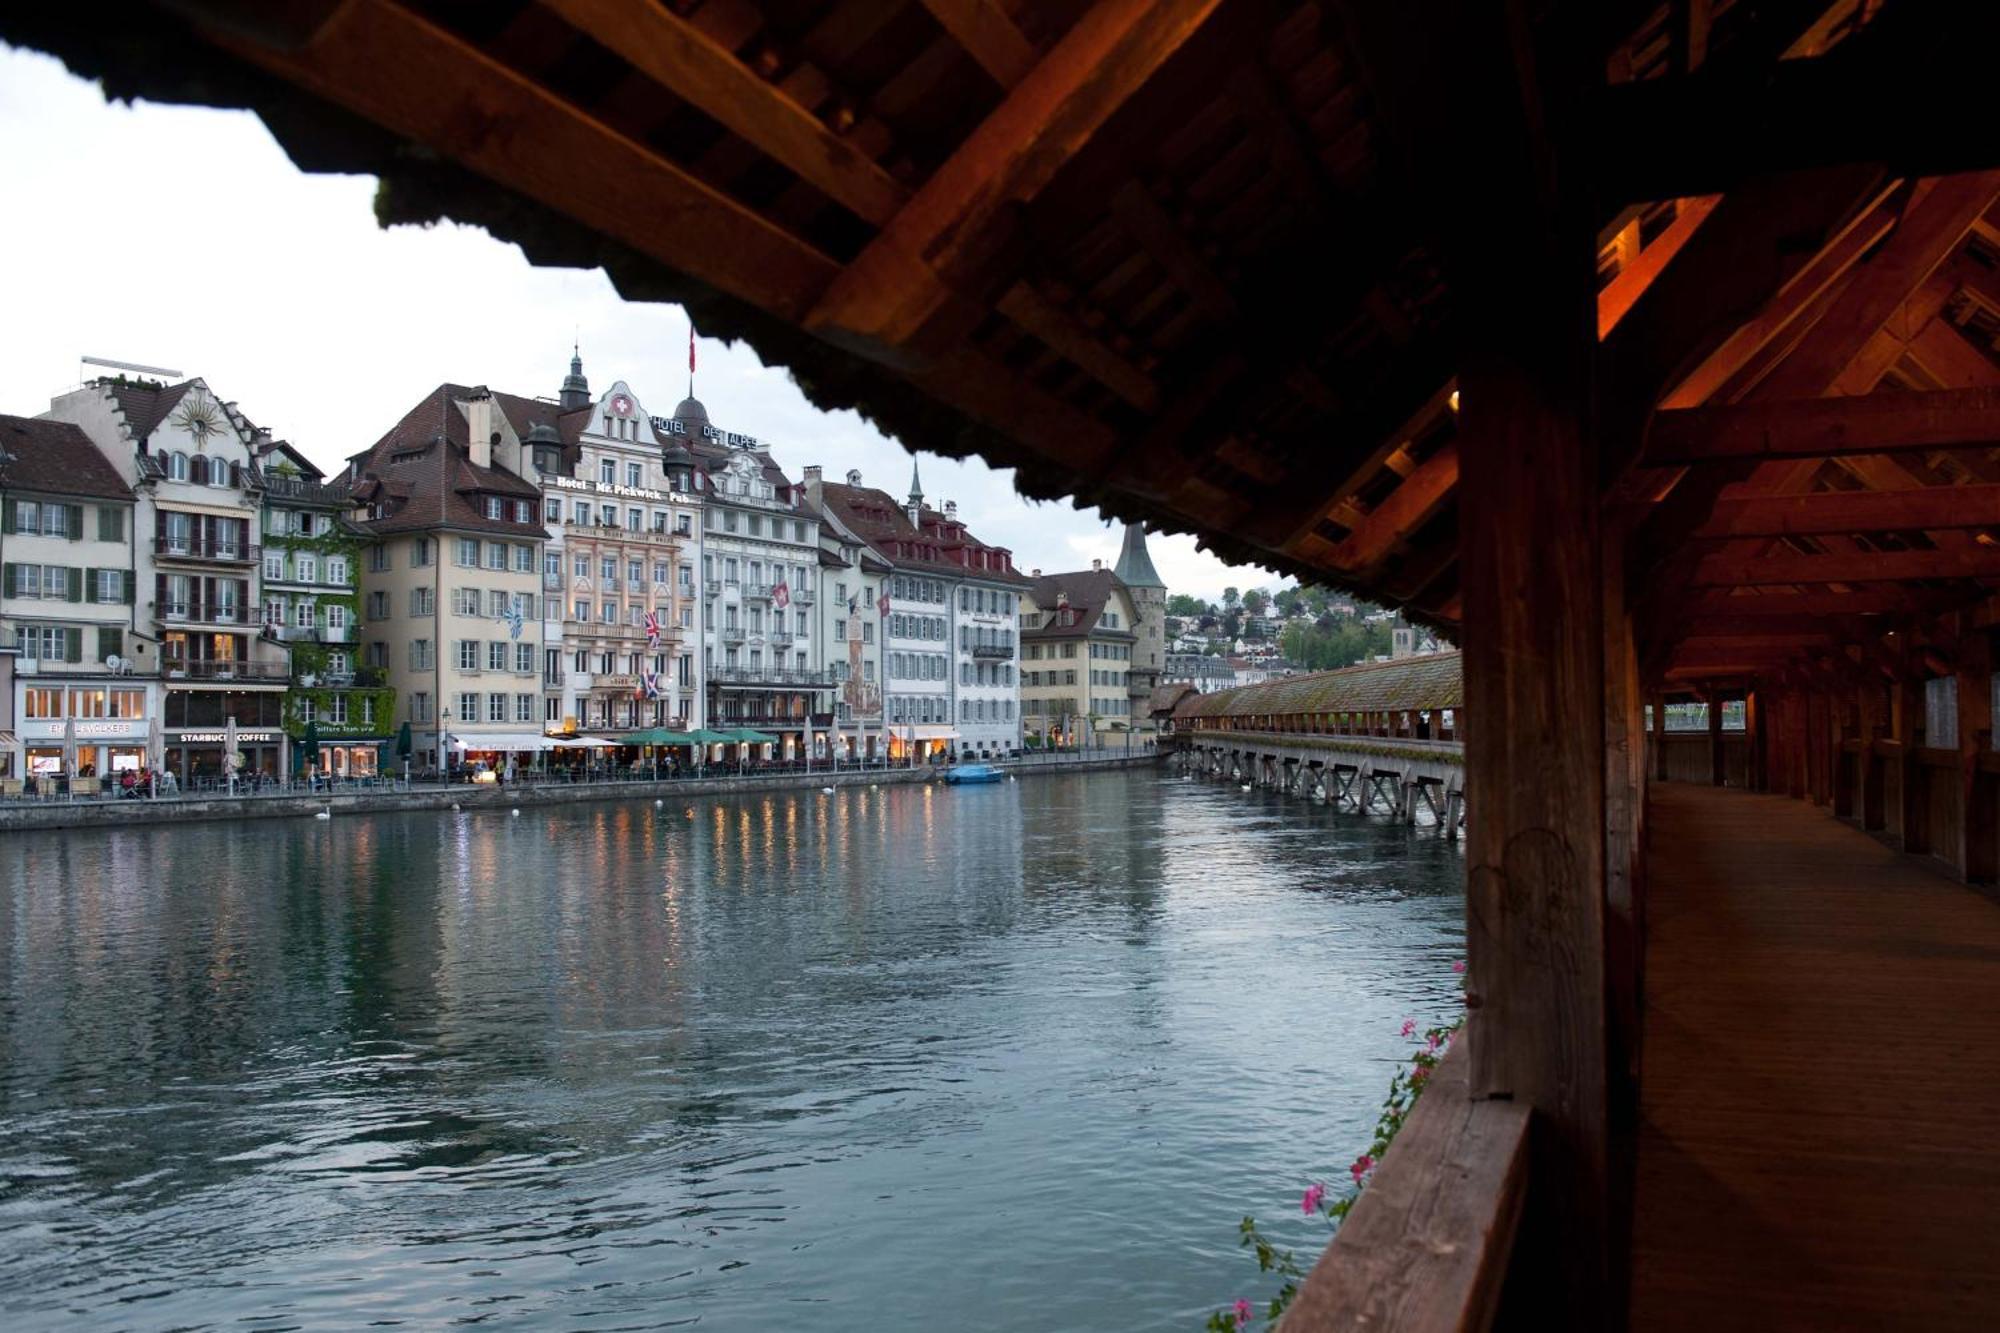 Hotel Pickwick And Pub "The Room With A View" Luzern Exterior foto